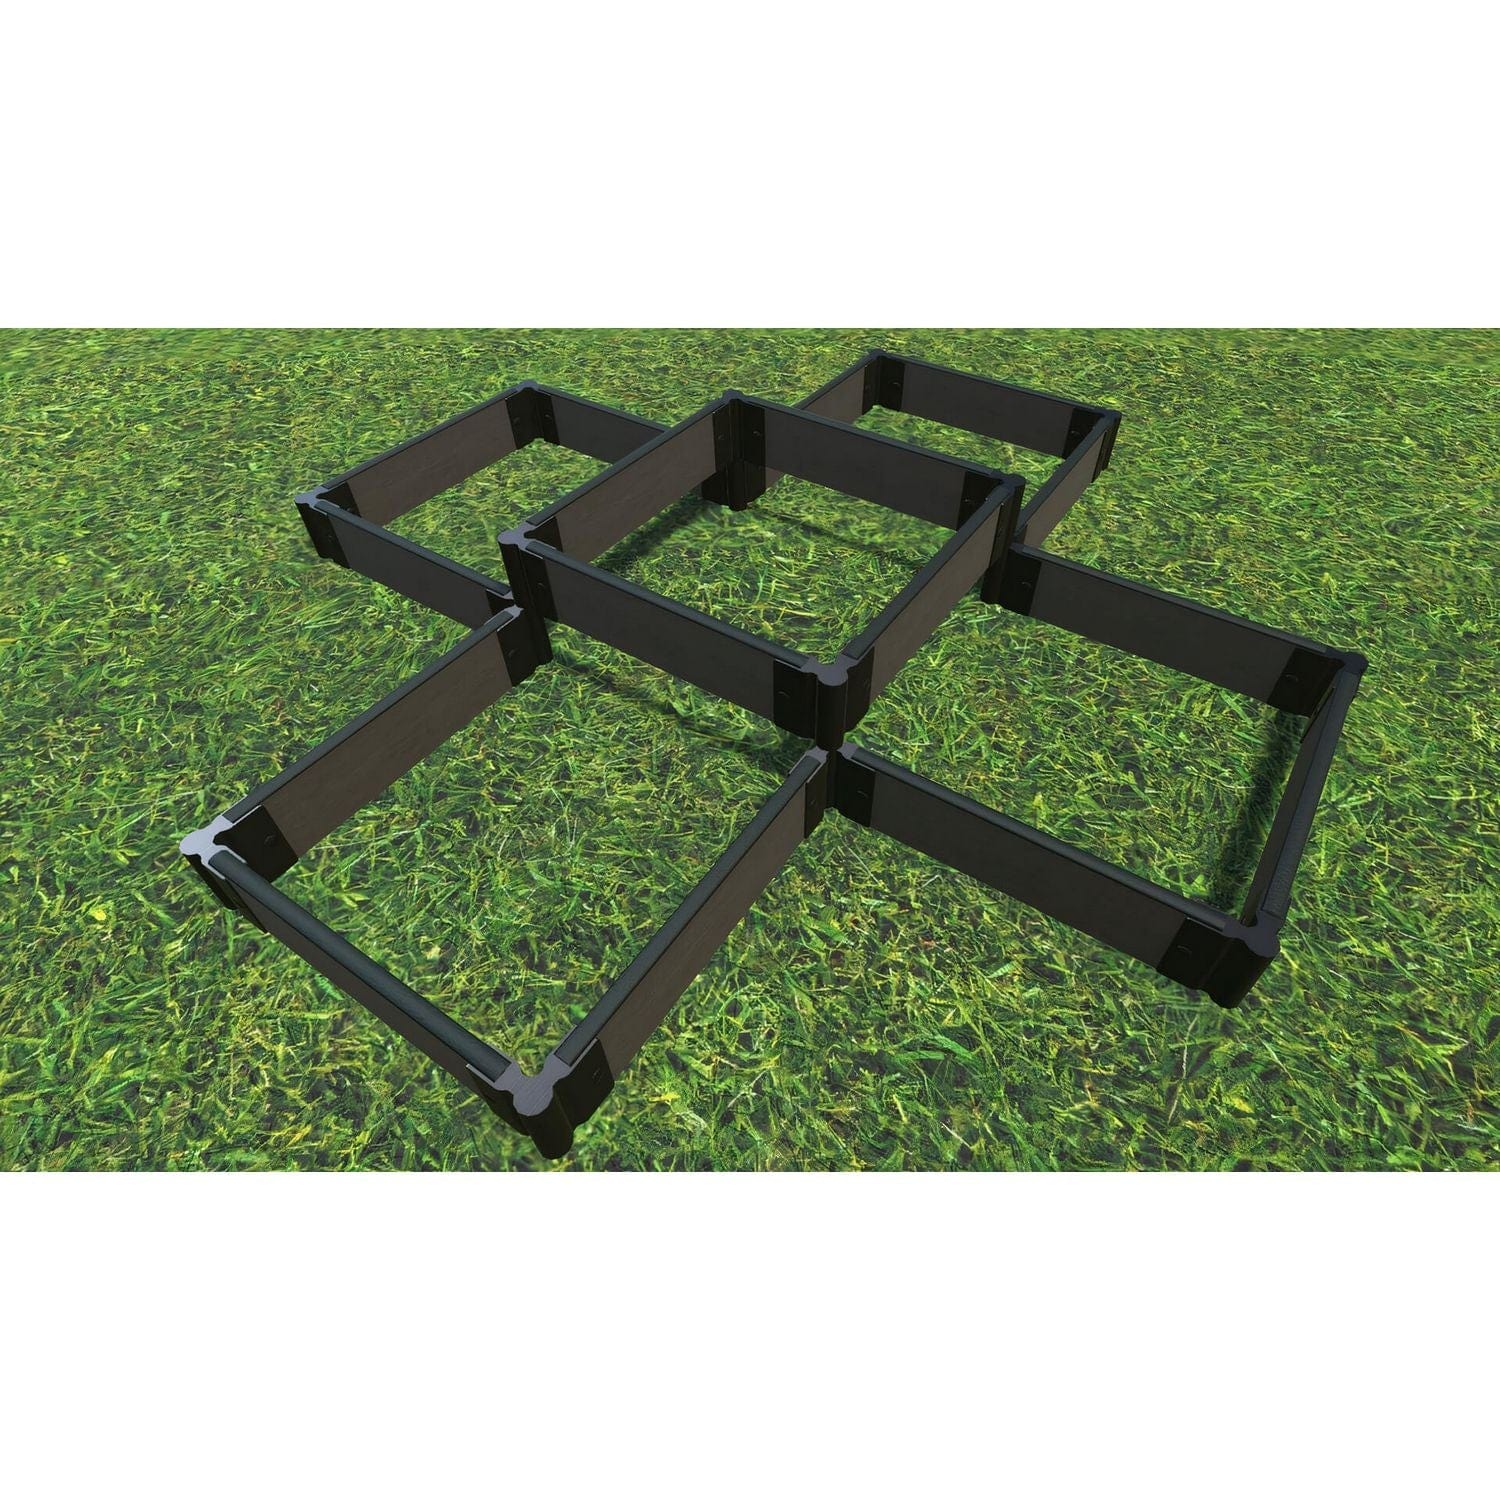 Frame It All Gardening Accessories Frame It All | Tool-Free Notre Dame Raised Garden Bed (Terraced Cross) 6' X 6' X 5.5" - Weathered Wood - 1" Profile 200001402